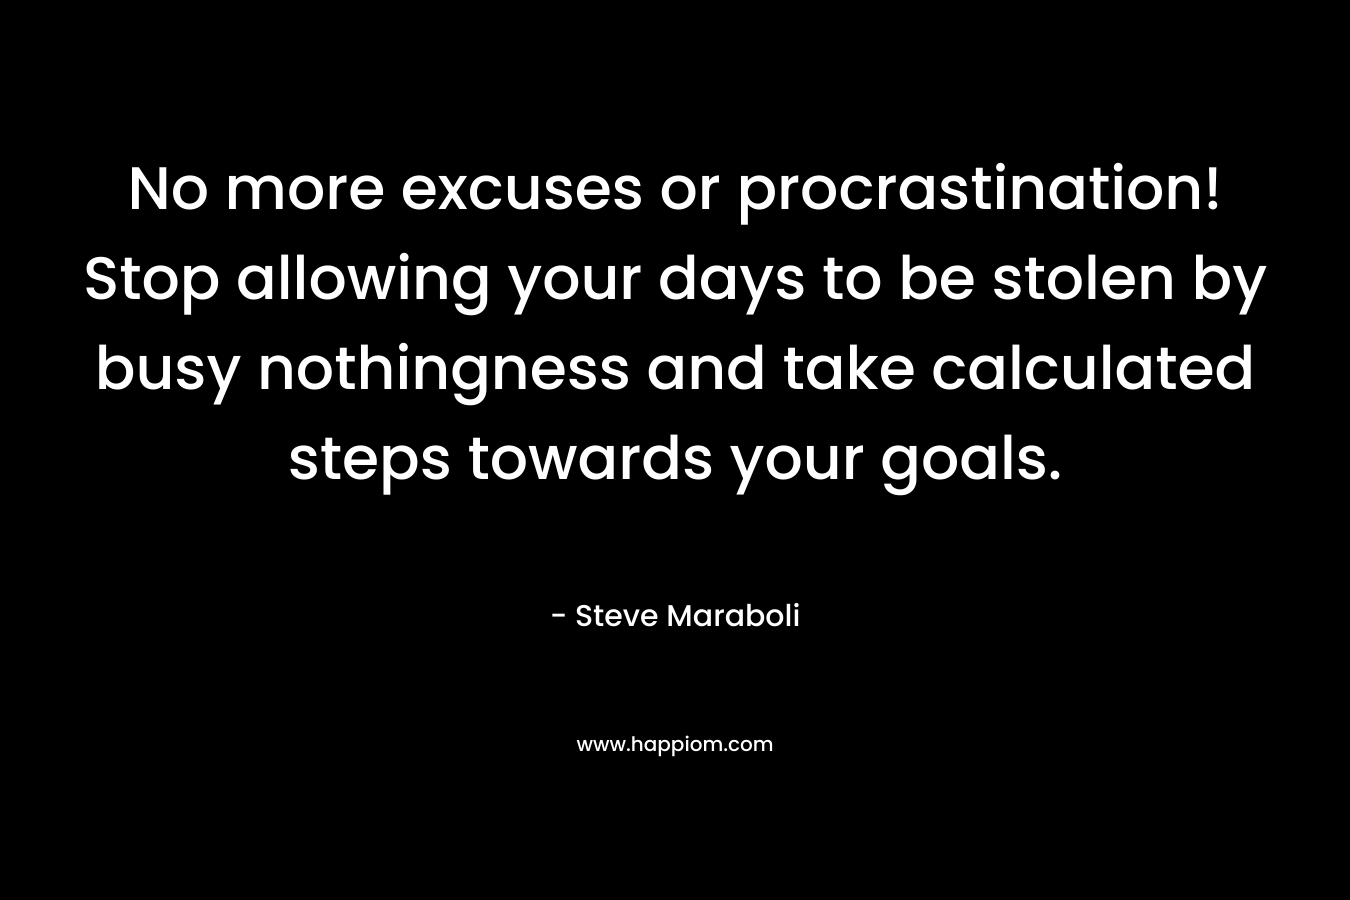 No more excuses or procrastination! Stop allowing your days to be stolen by busy nothingness and take calculated steps towards your goals. – Steve Maraboli